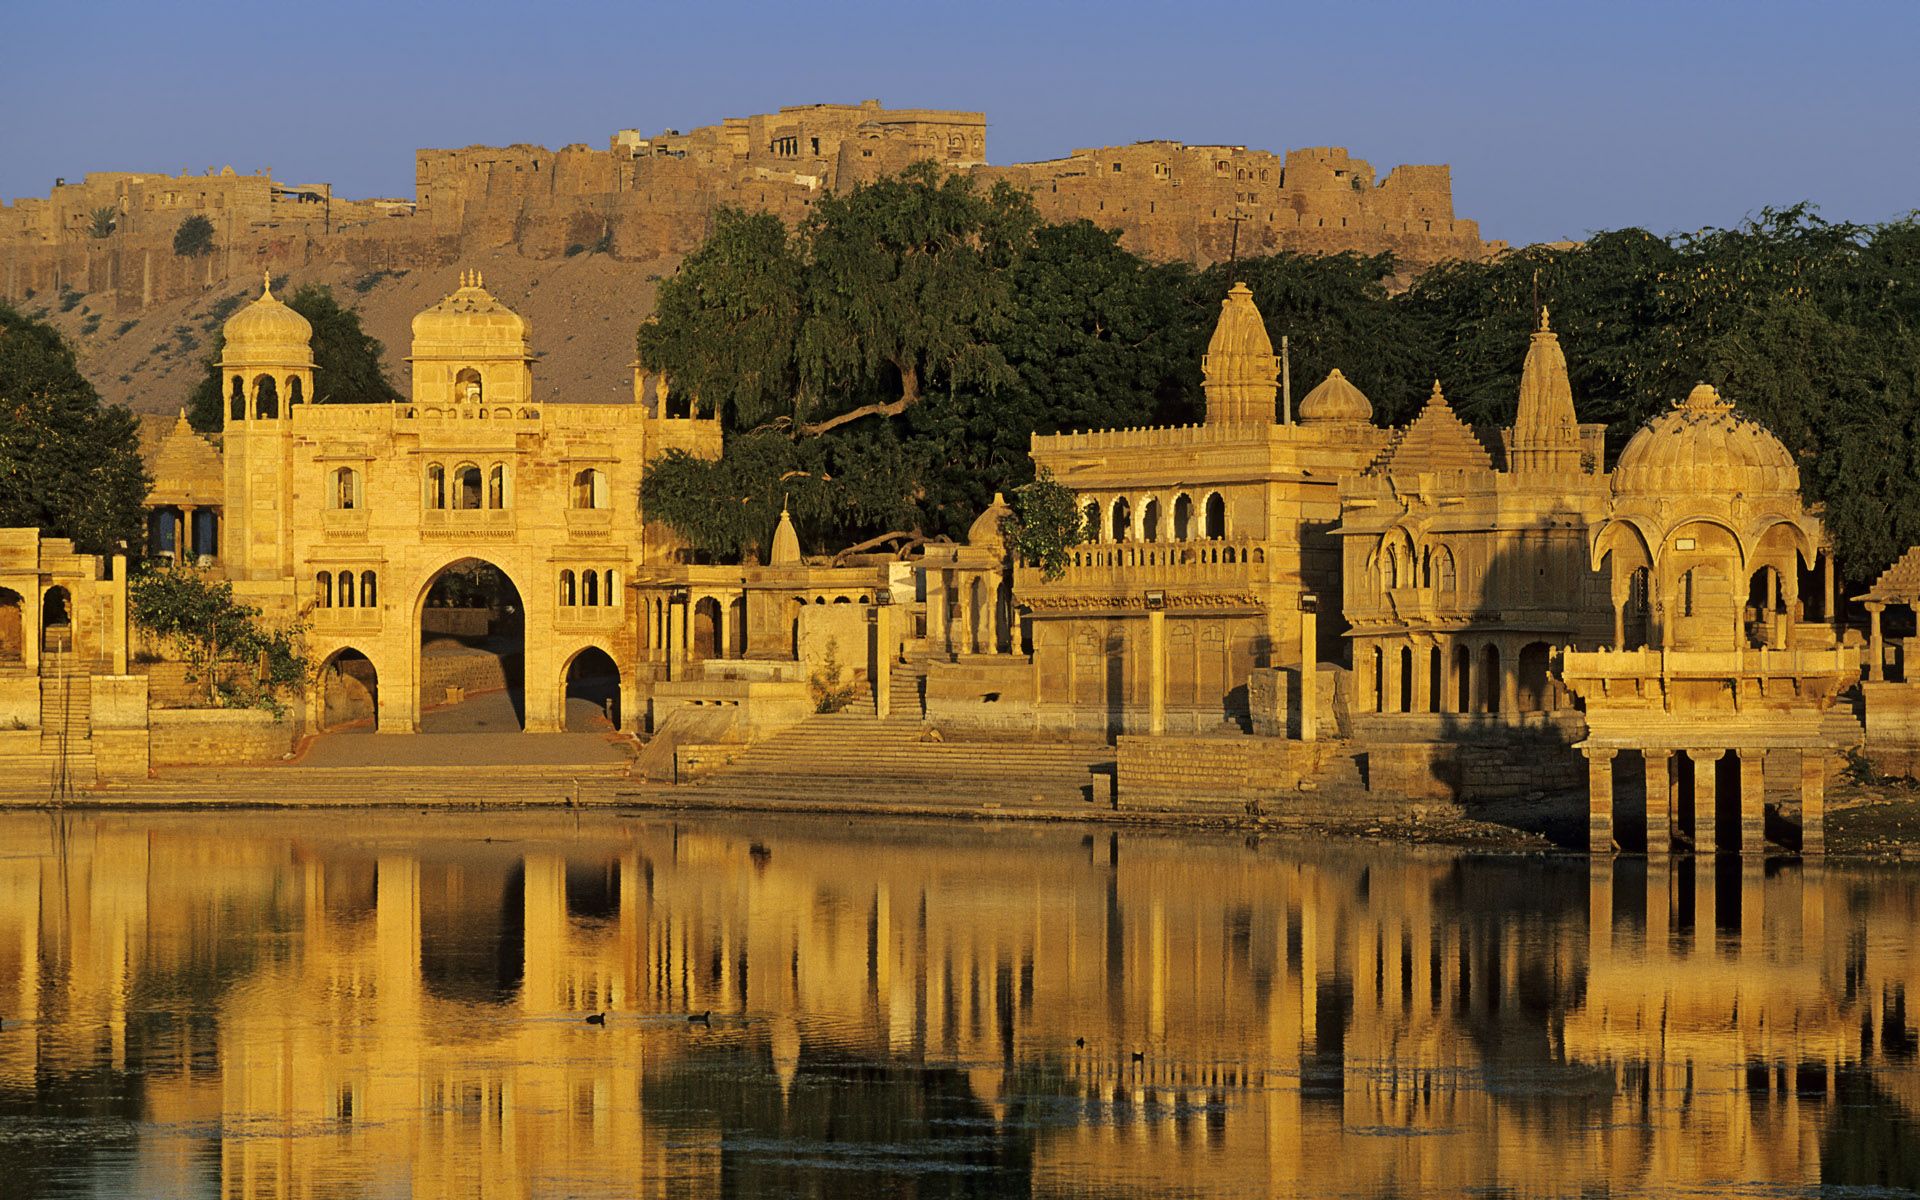 Historical Places In Rajasthan